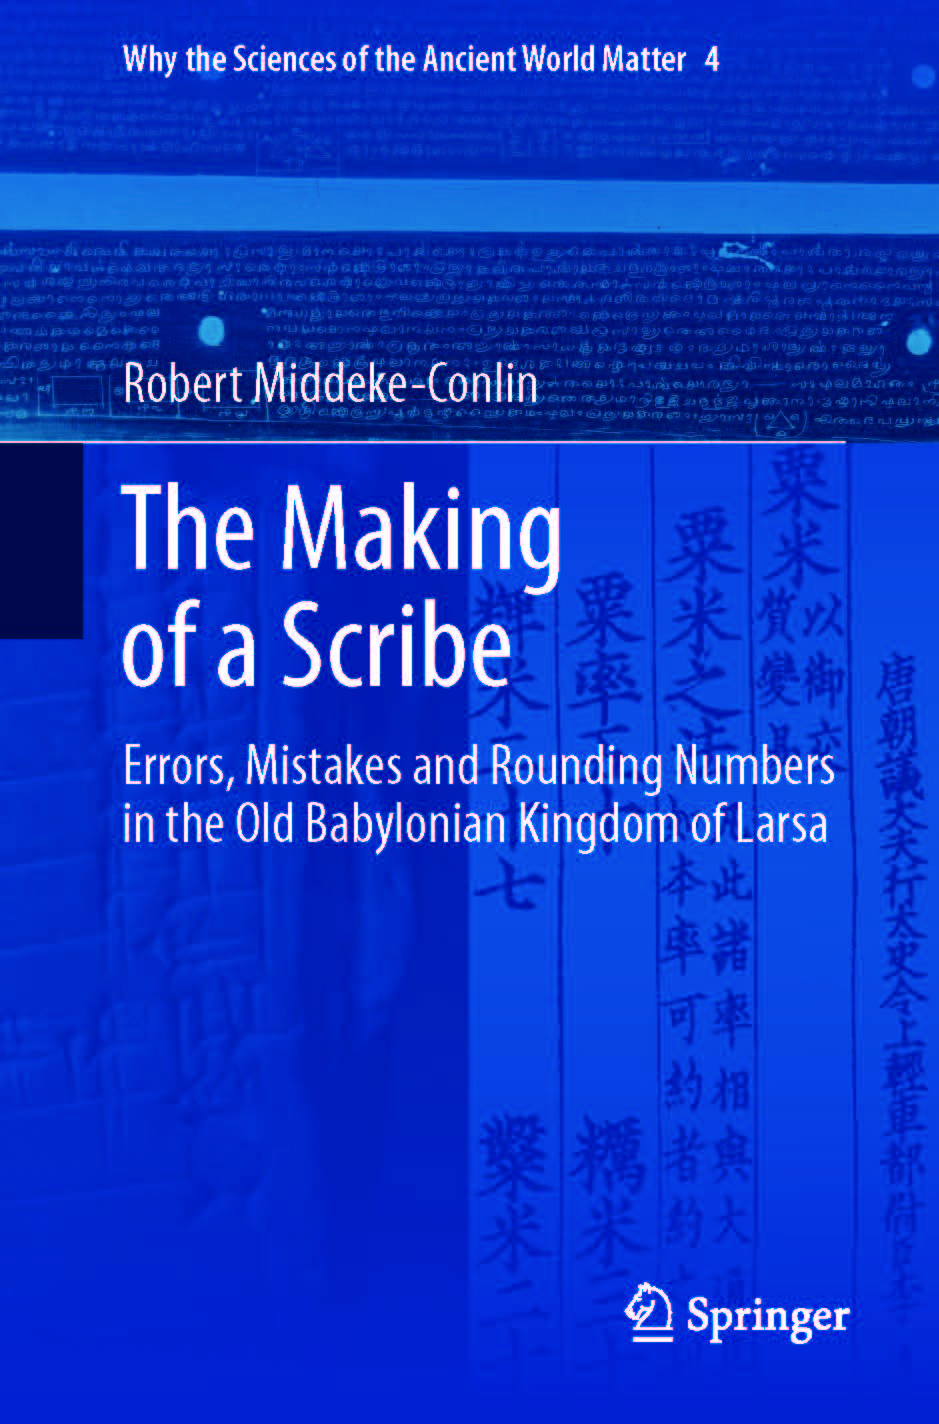 book cover: R.W. Middeke-Conlin: The Making of Scribe (2020)